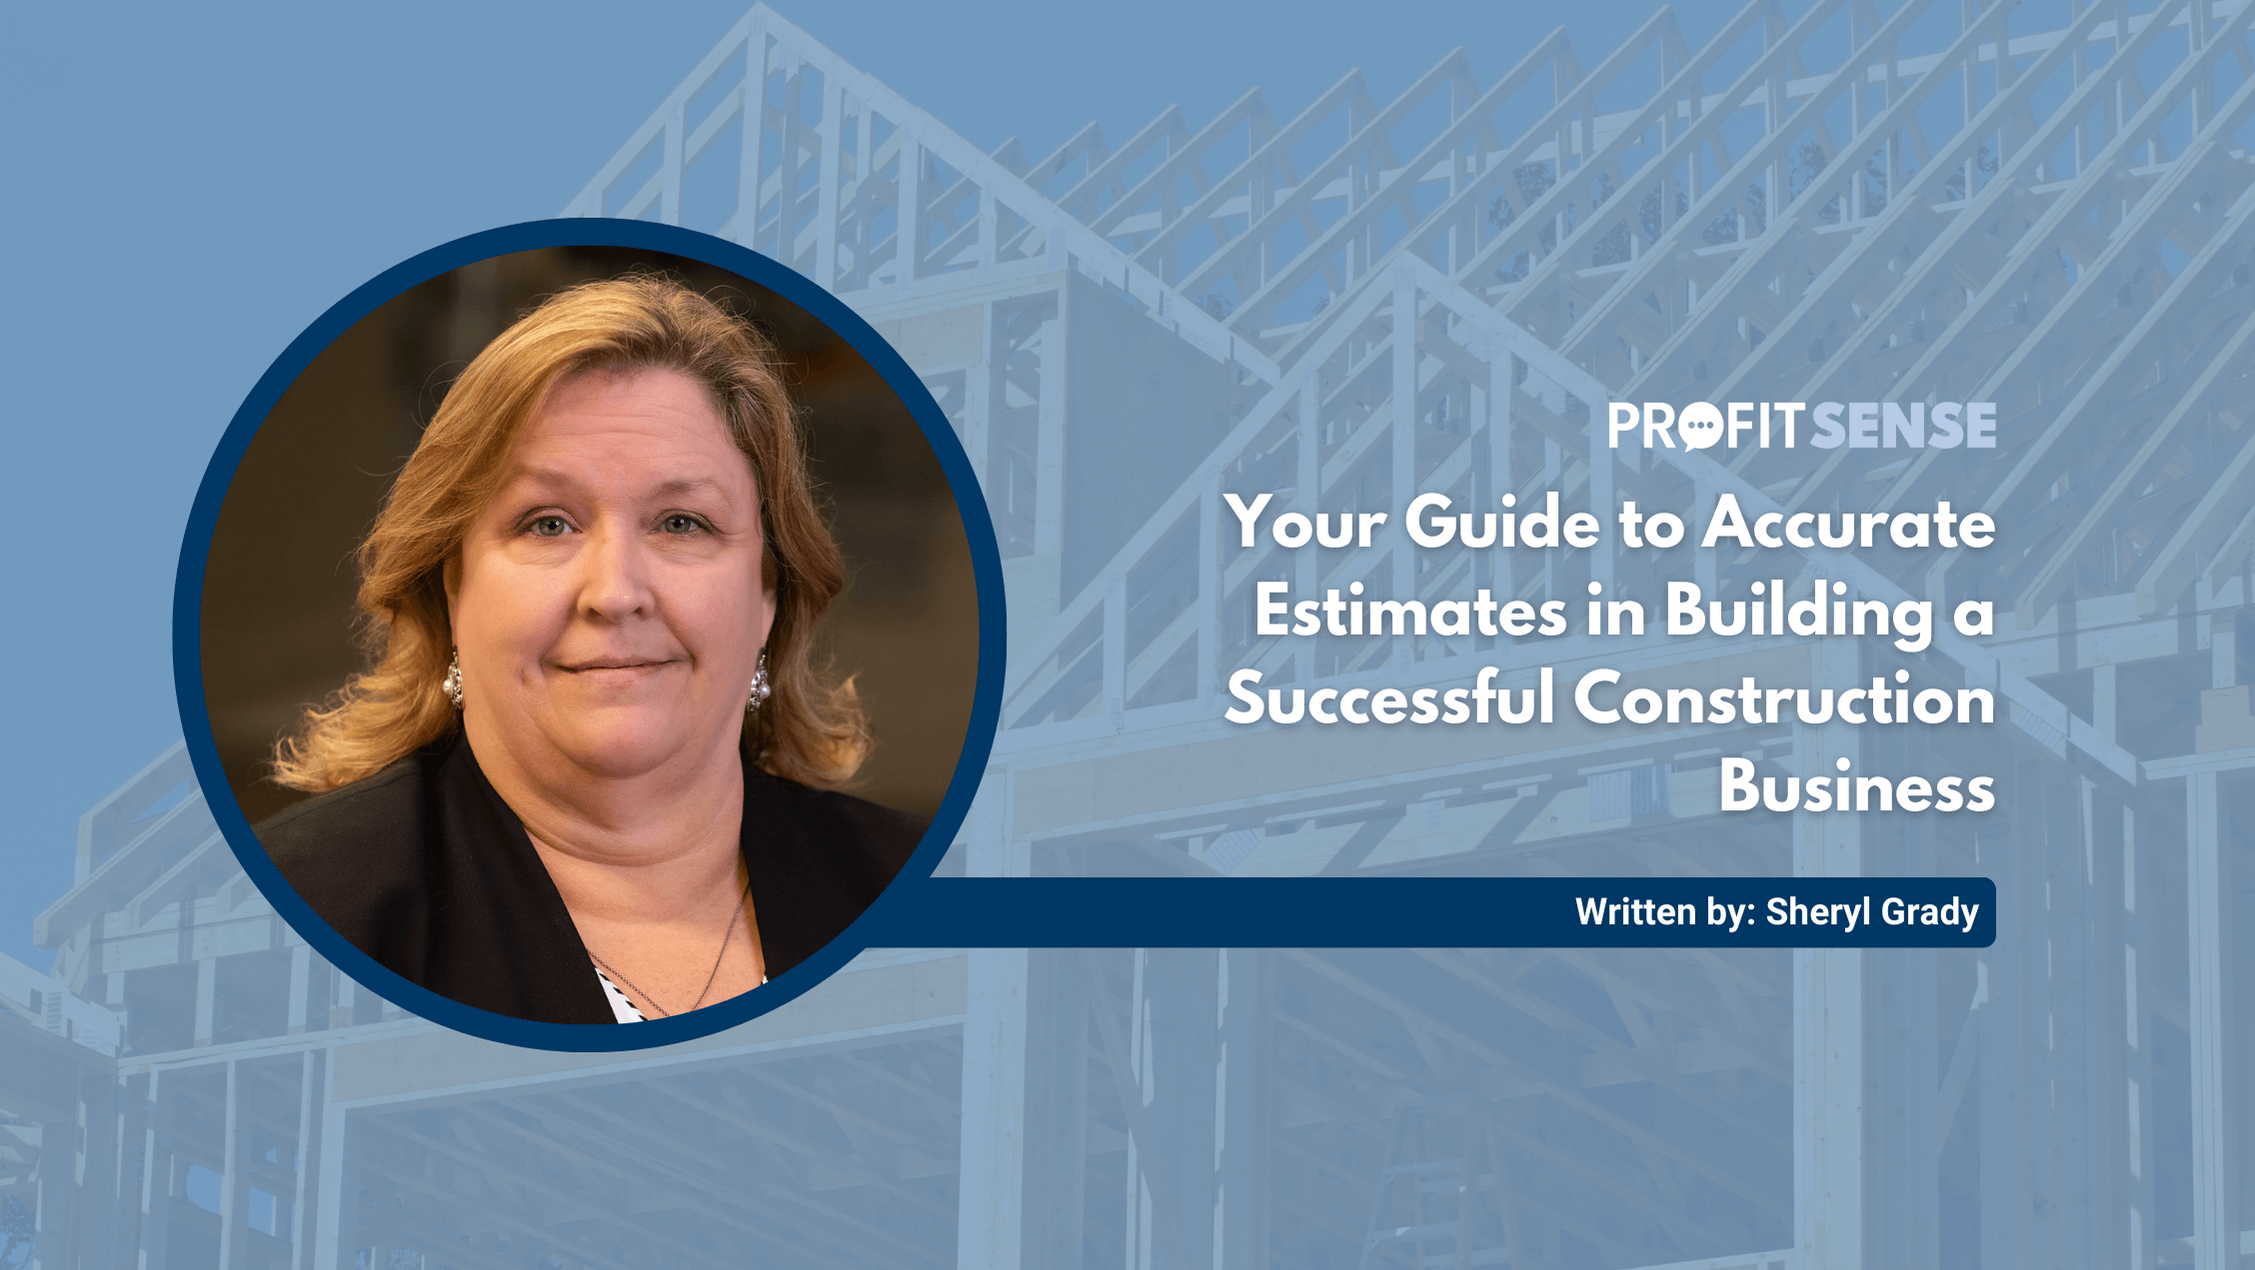 Your Guide to Accurate Estimates in Building a Successful Construction Business